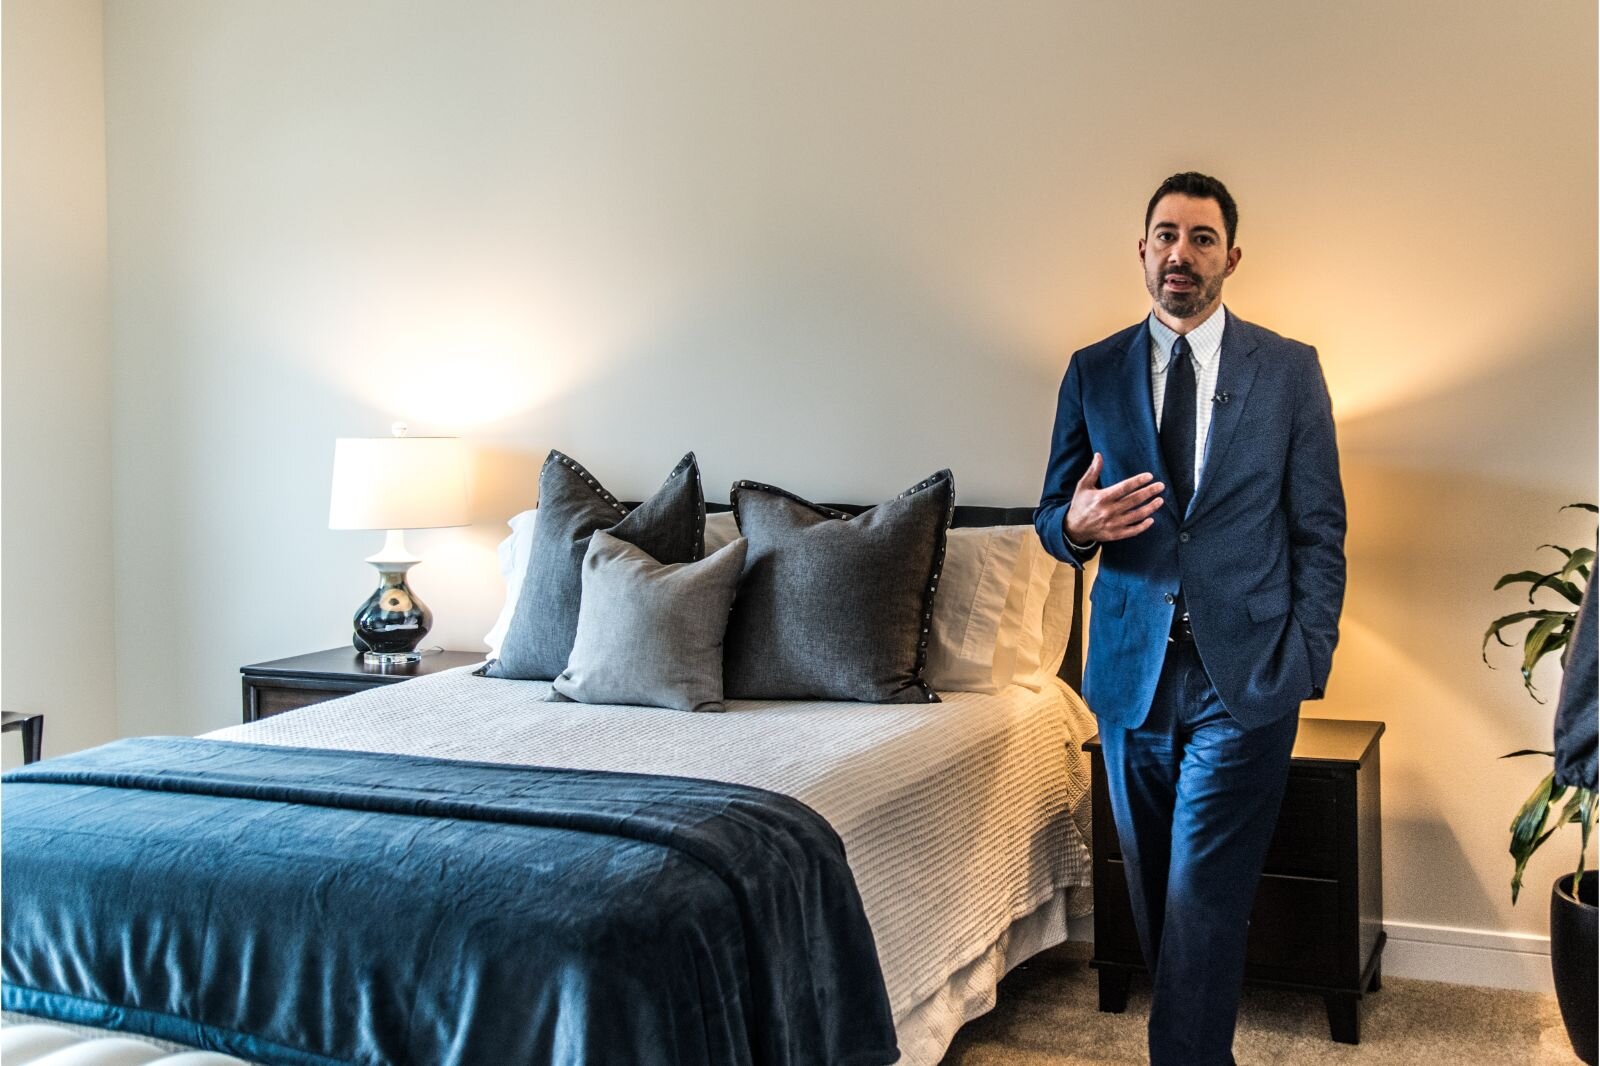 Jay Prince, President and CEO of Heritage Community of Kalamazoo, inside a model apartment at Revel Creek. The complex has 10 different floor plans for the one- and two-bedroom apartments. They range from 881 square feet to 1,597 square feet.